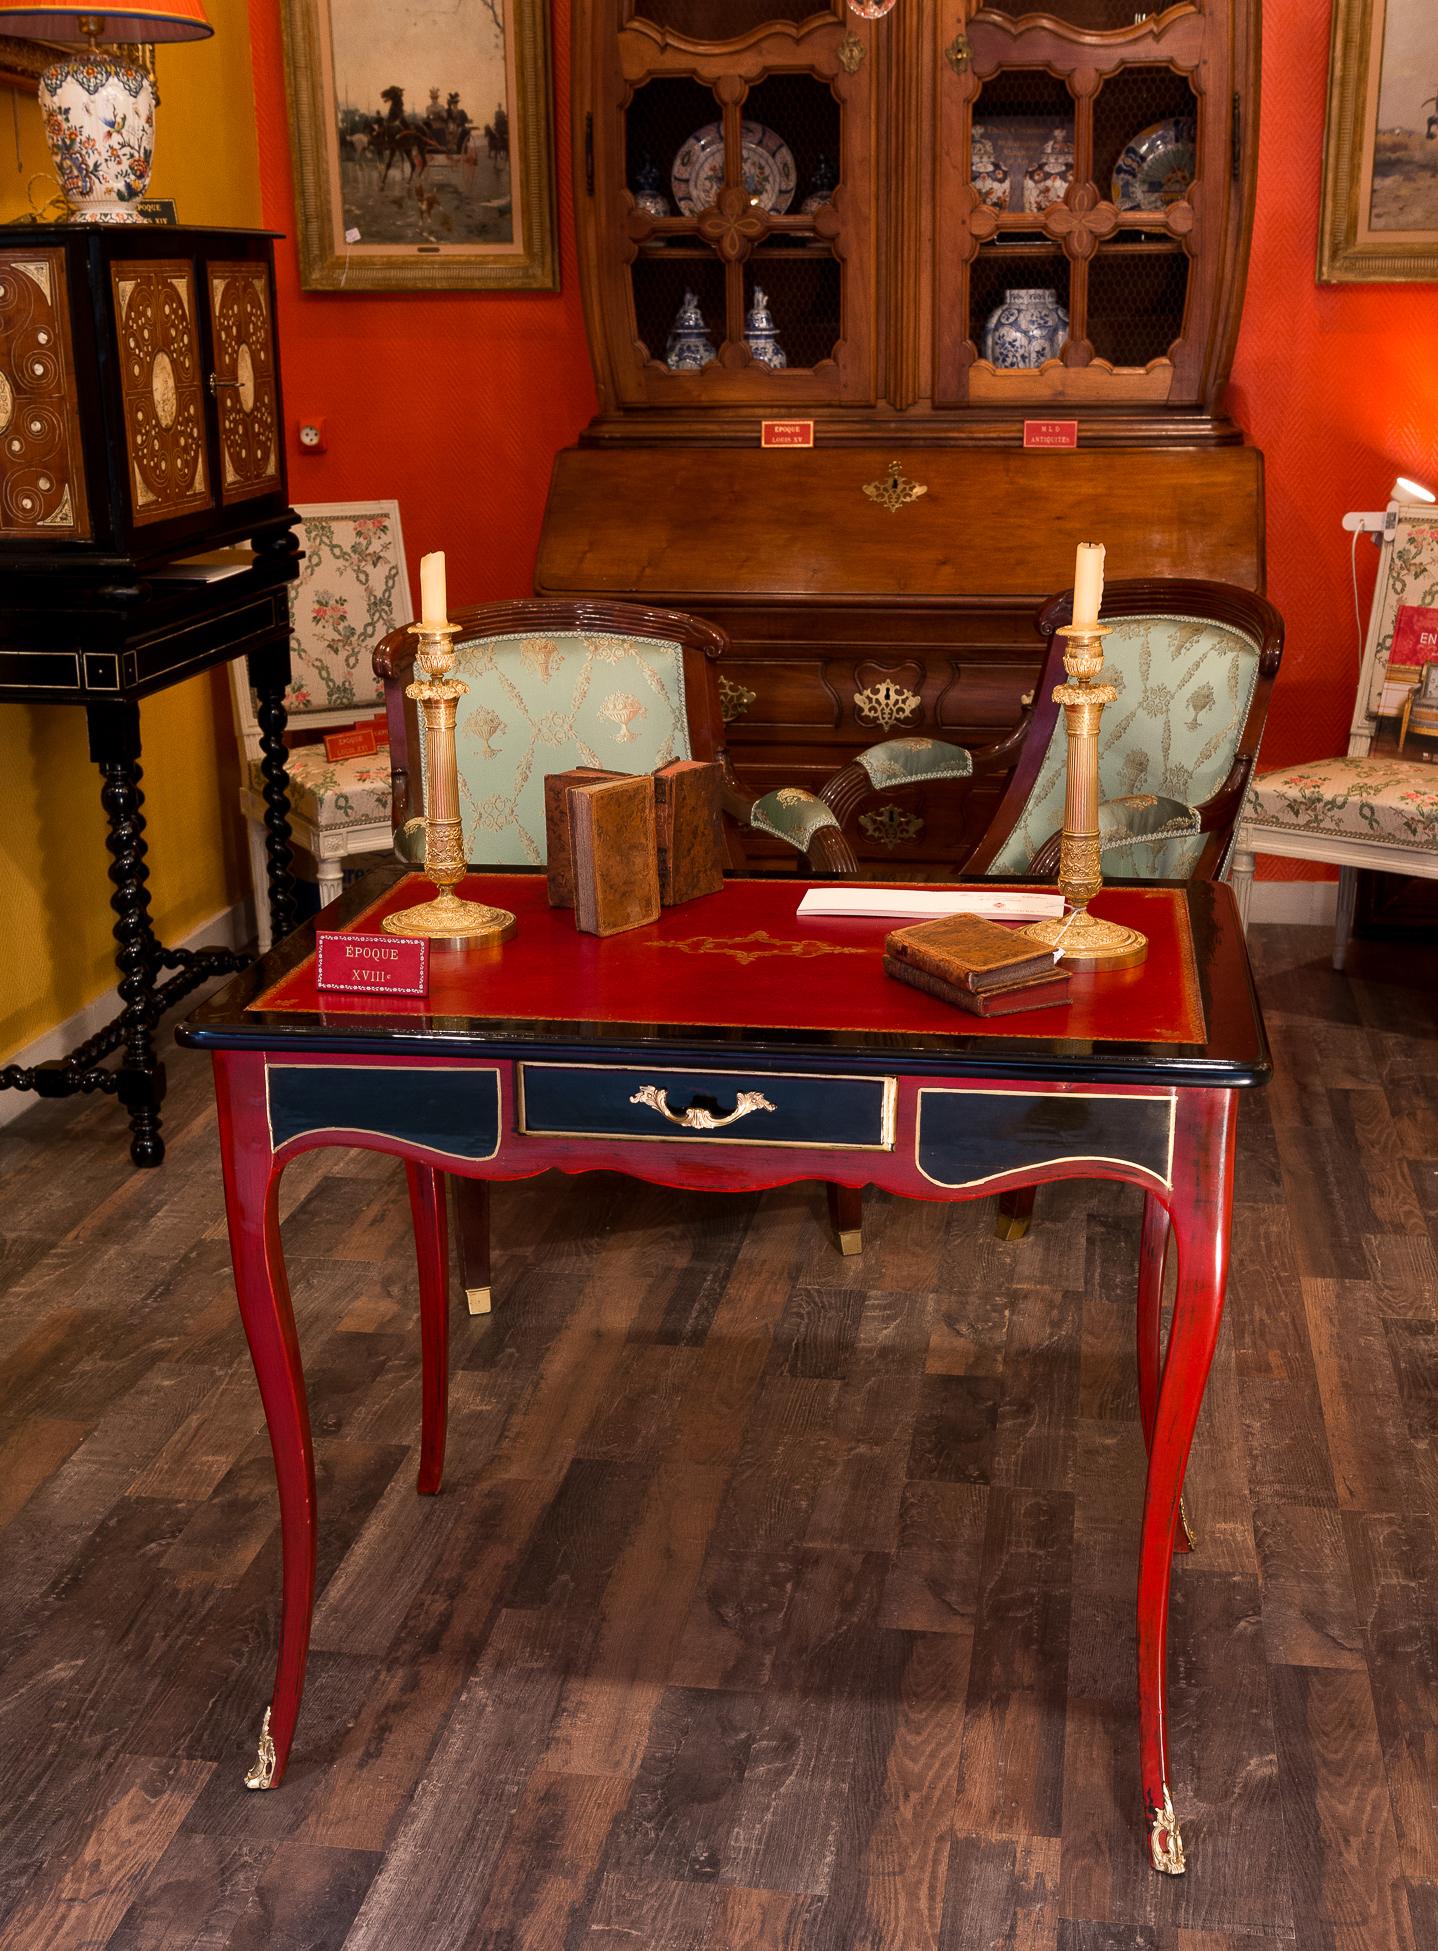 French Louis XV period small desk in fruitwood lacquered, circa 1740-1750.

An elegant and decorative red and black lacquered fruitwood and picked out gold small desk. Our desk raised on serpentine legs. One drawer. On the top a lovely old red